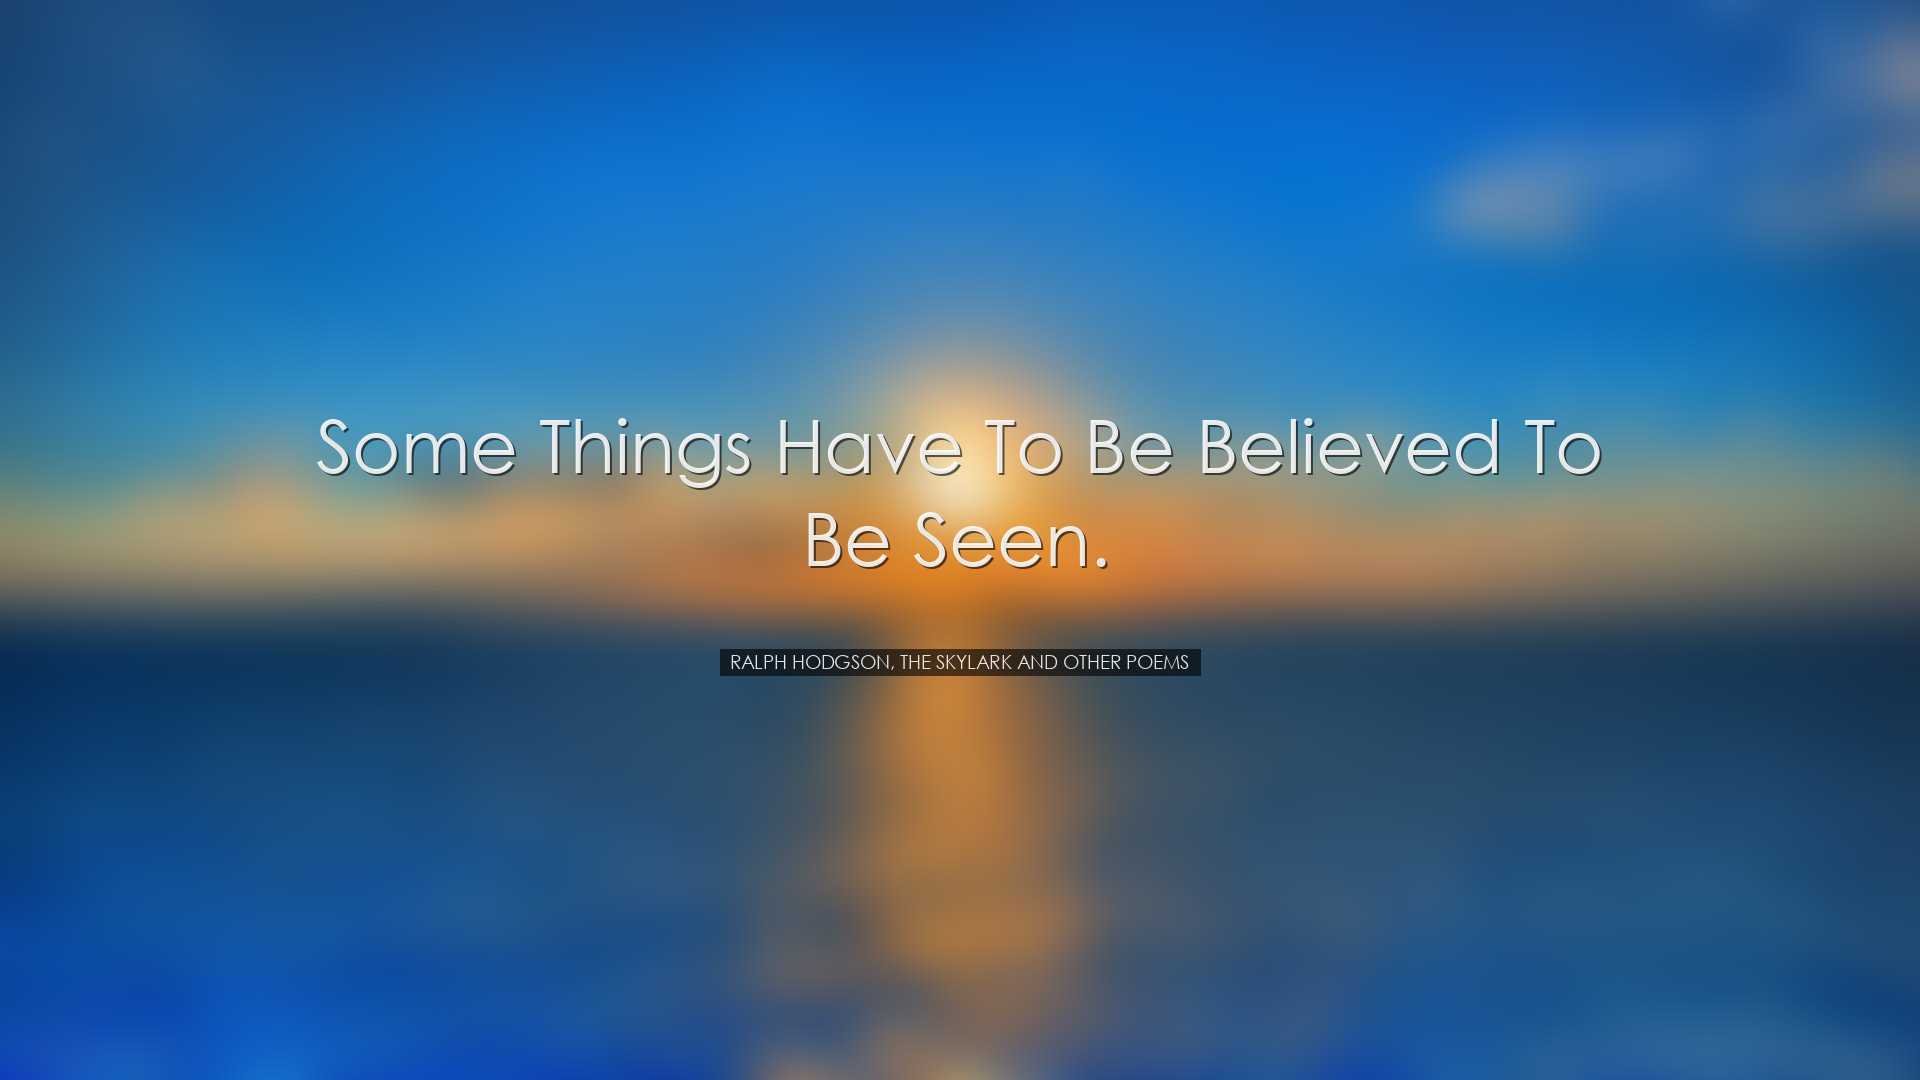 Some things have to be believed to be seen. - Ralph Hodgson, The S